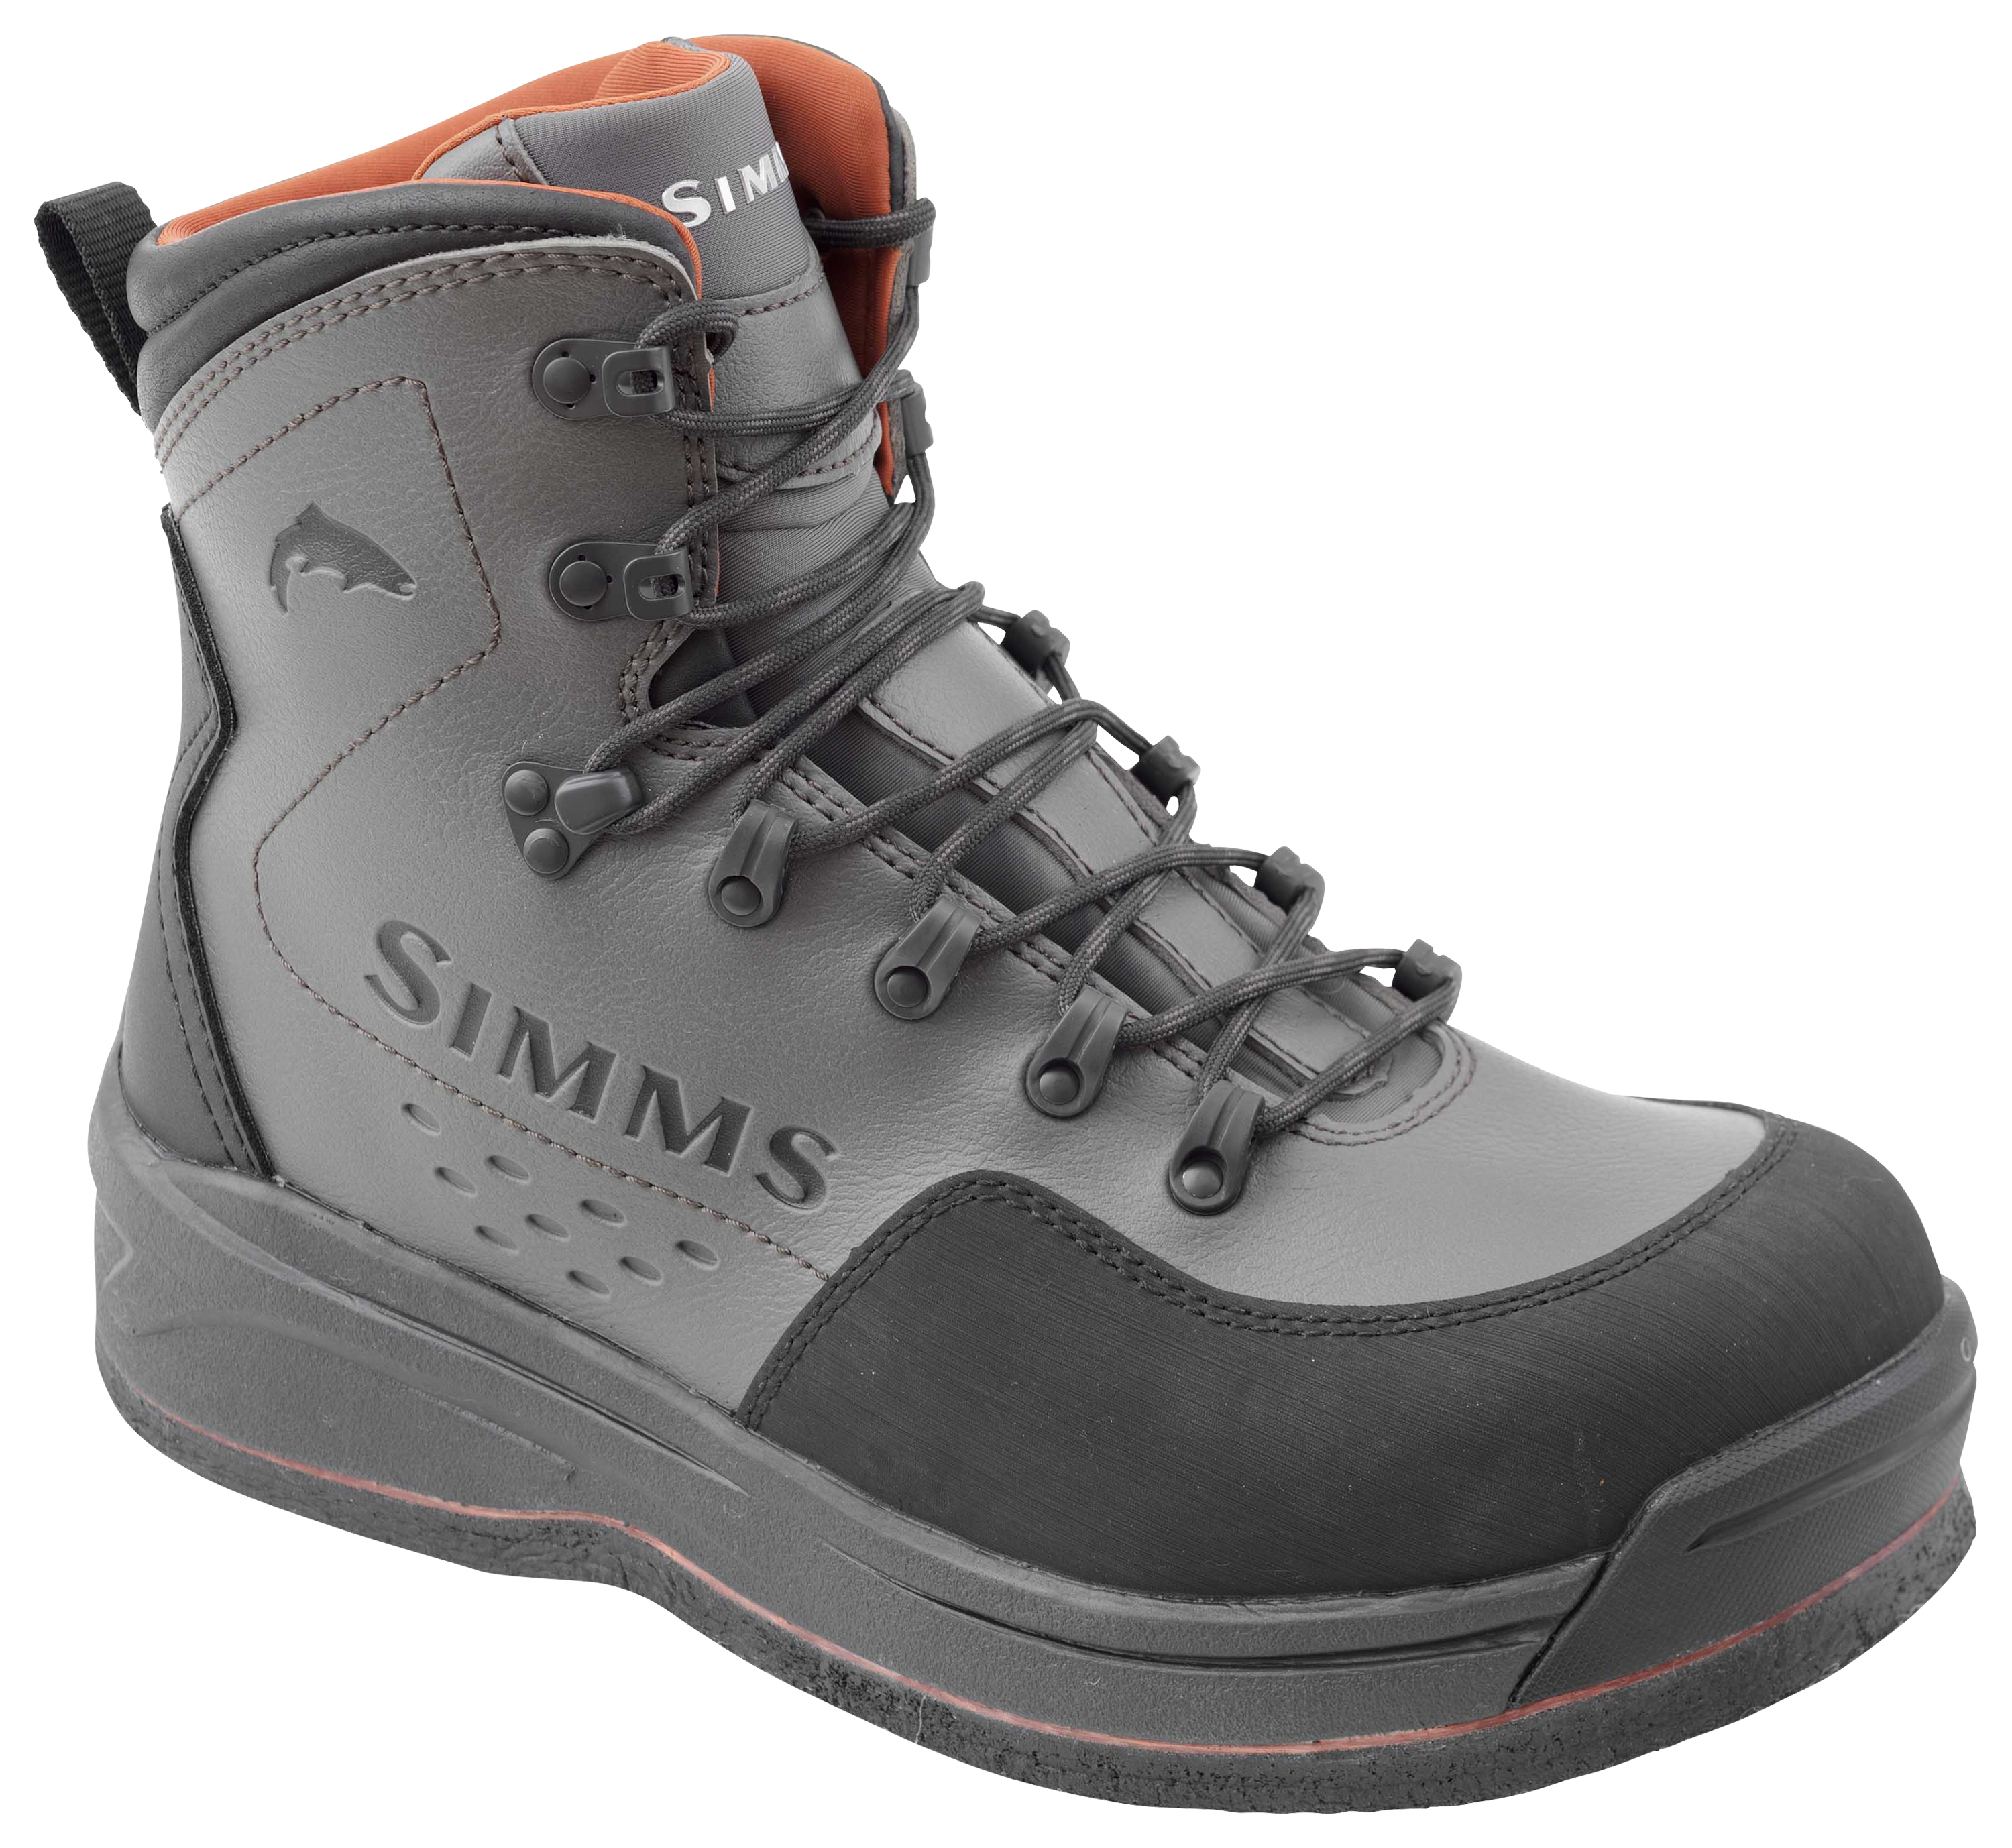 Simms Fly Fishing Boots Brown Leather Felt Sole Wading Boots Men